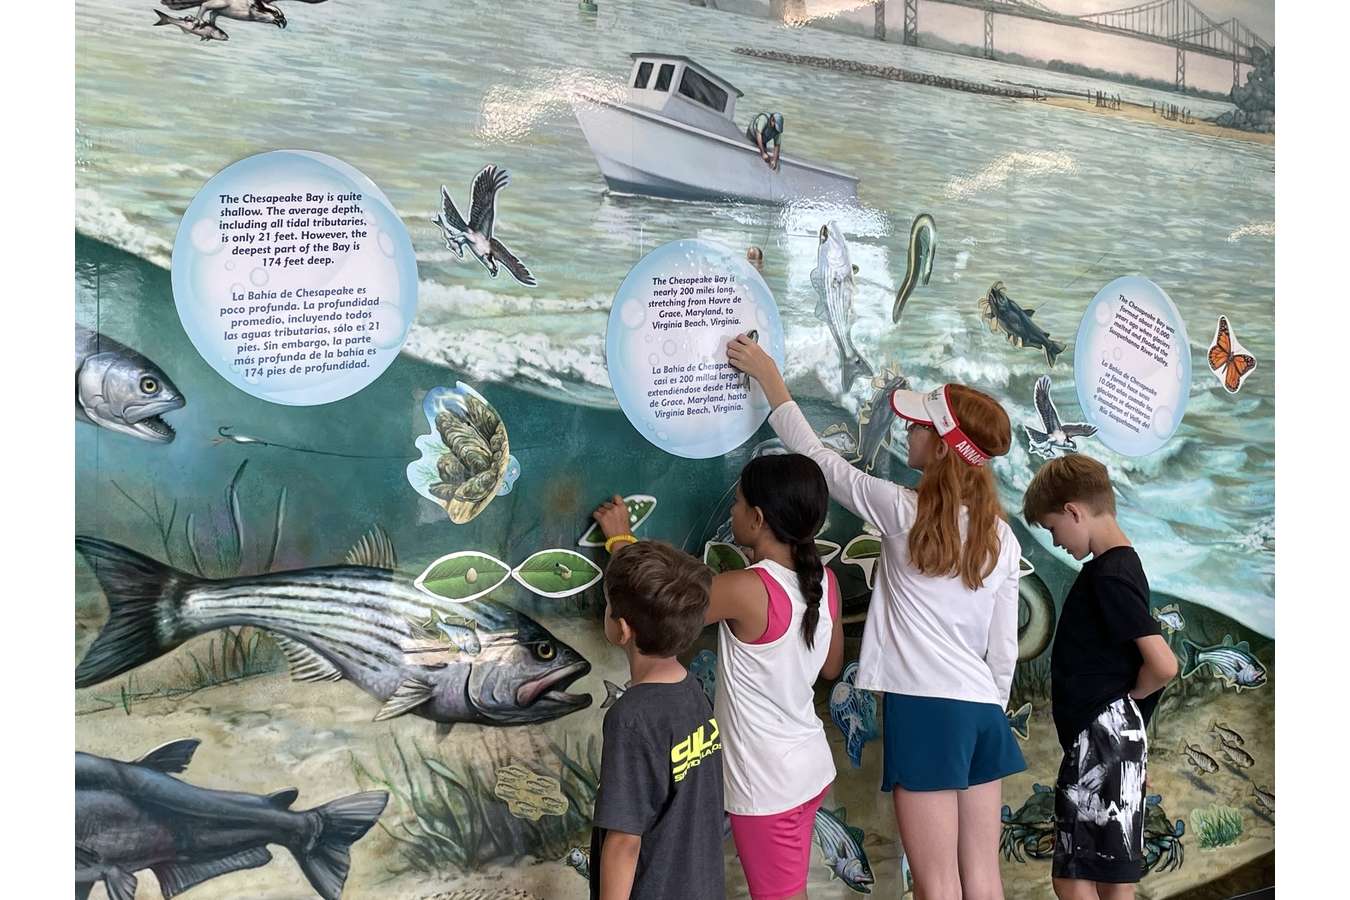 SPVC Kids Mural : The magnetized mural wall encourages interactive play and supports ranger-led programs about Bay ecology.